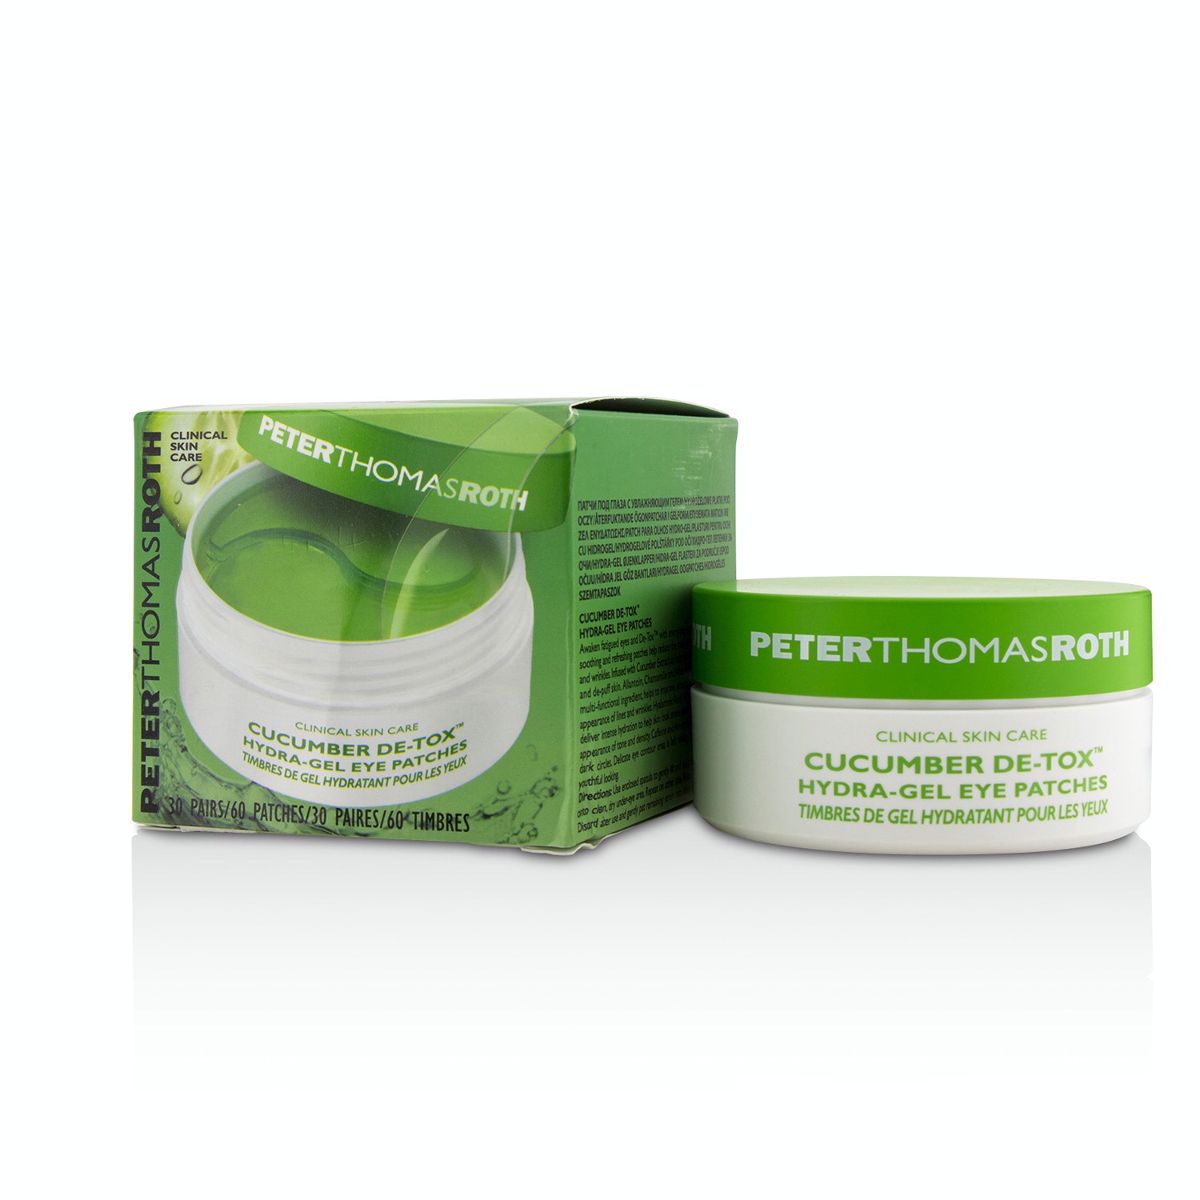 Cucumber De-Tox Hydra-Gel Eye Patches Peter Thomas Roth Image